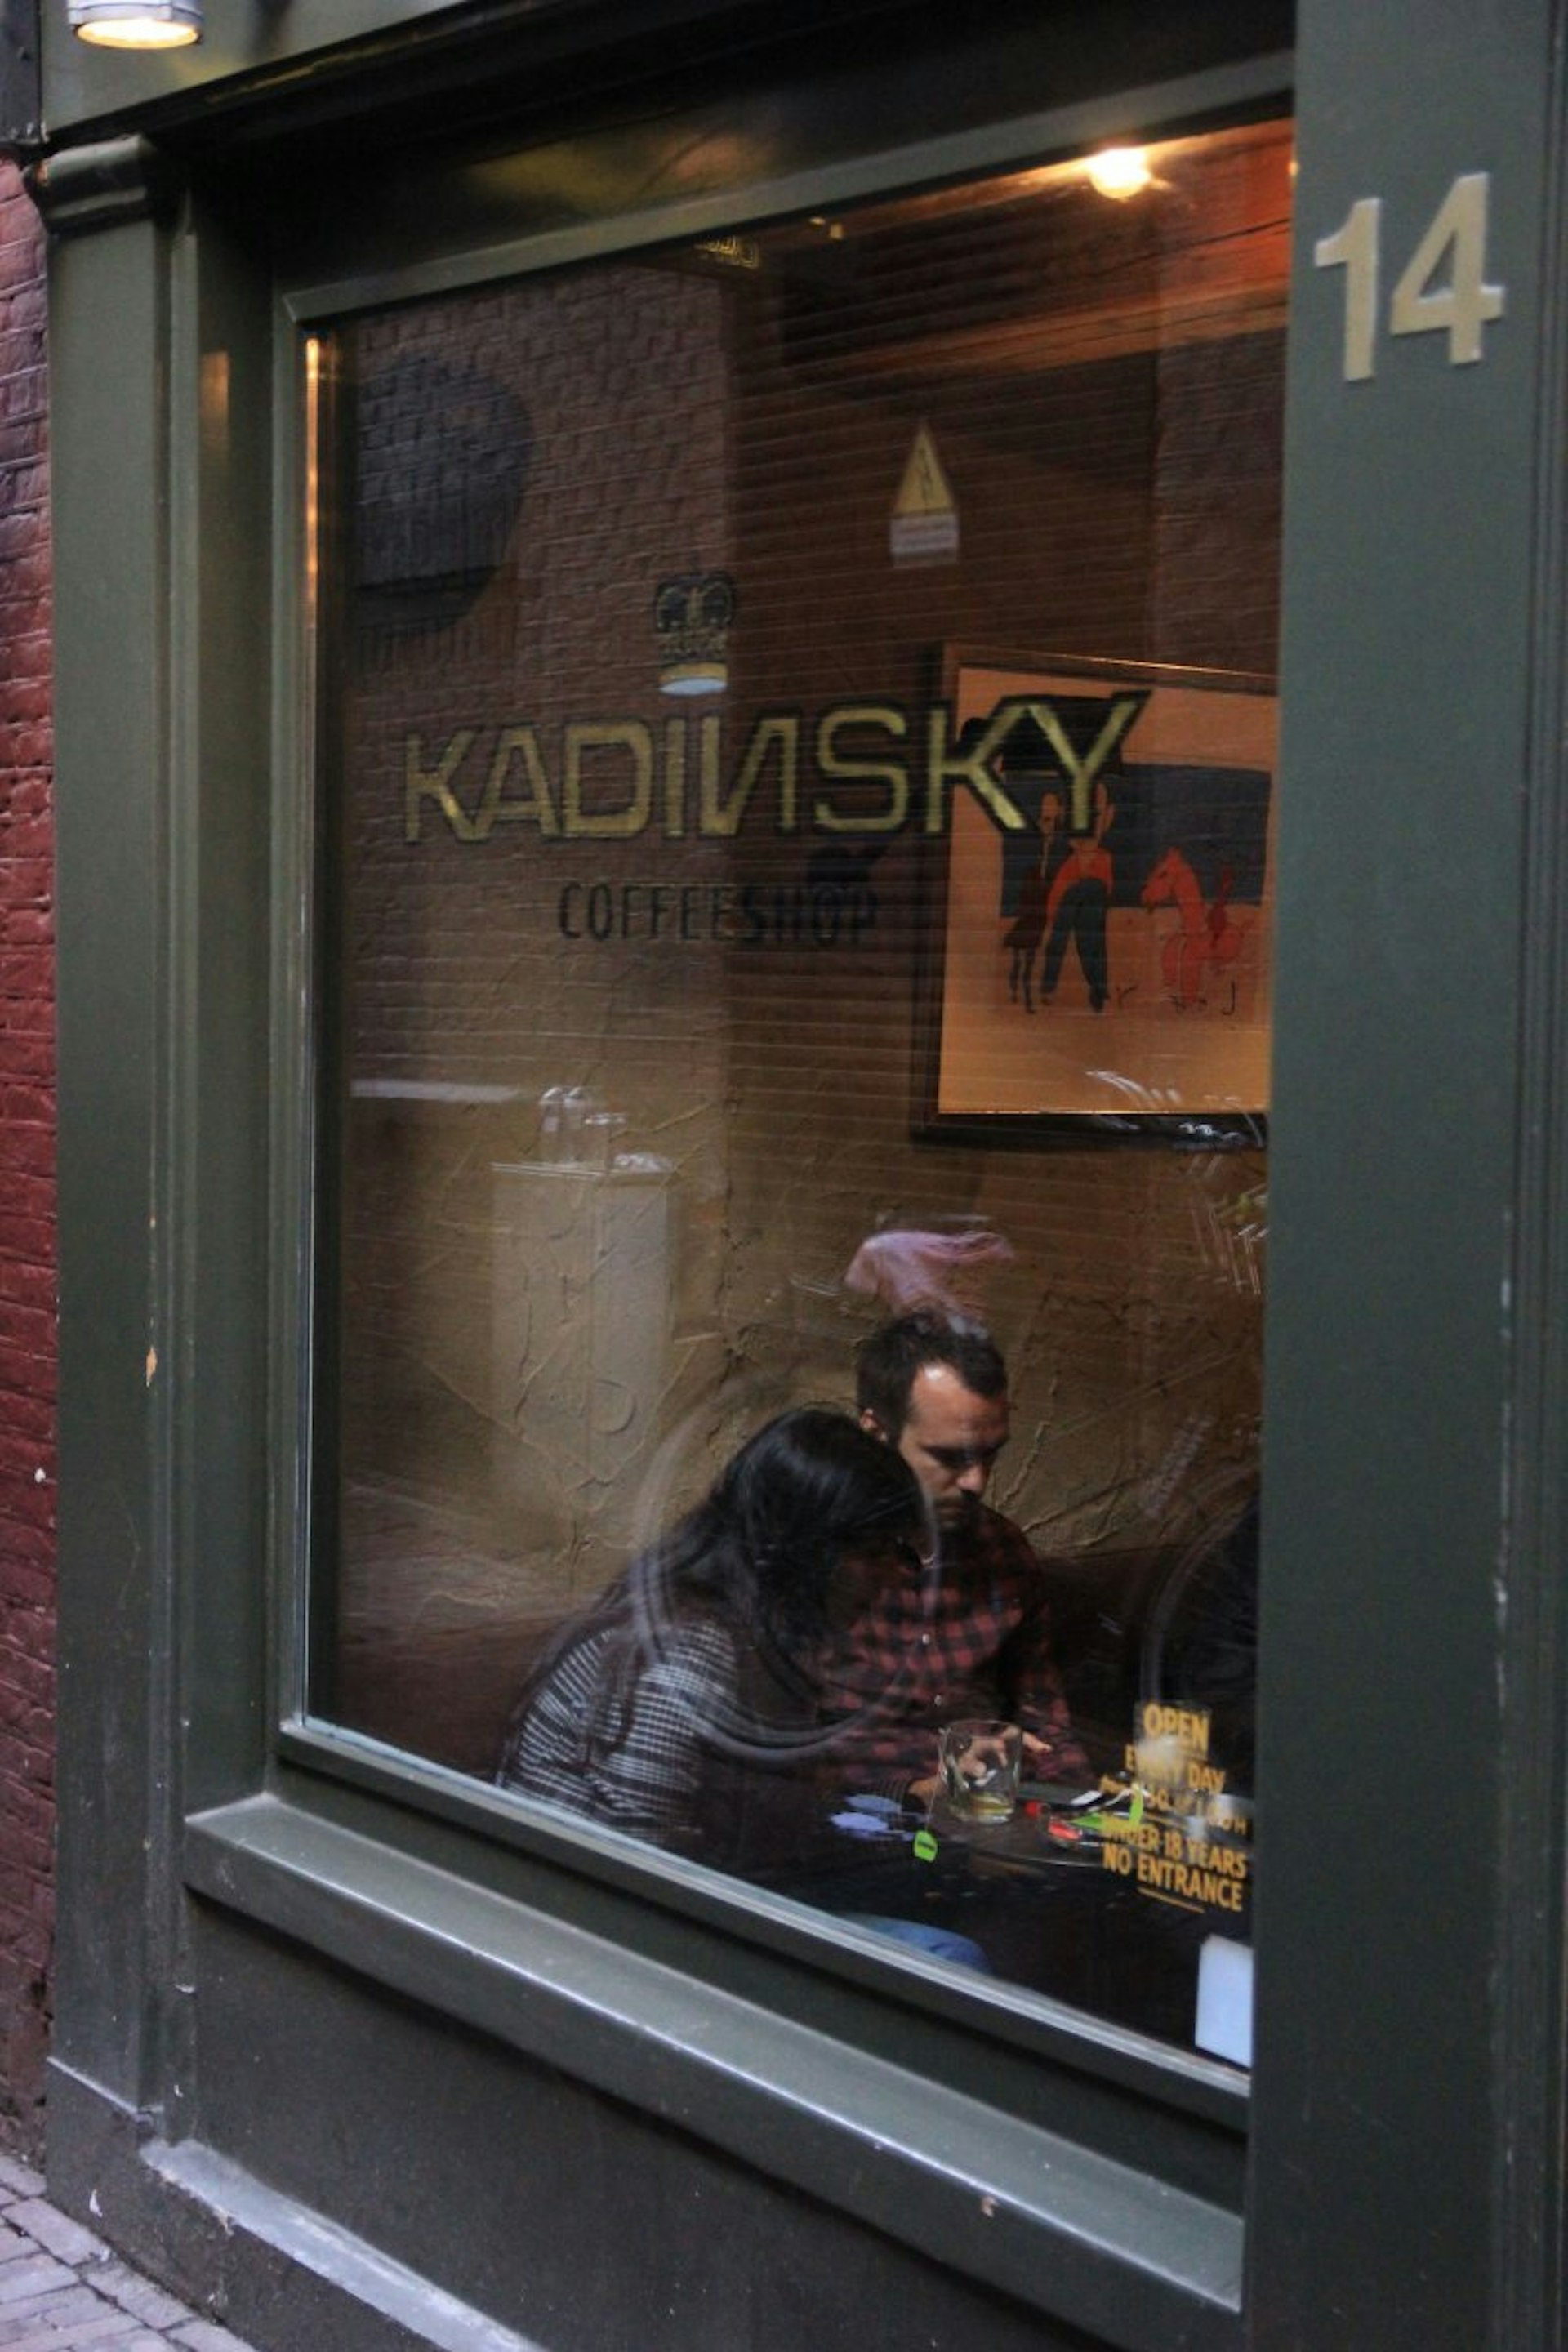 The exterior of Kadinsky Cafe Zoutsteeg which is painted black. Through the large window we can see a couple of people sitting at a table with drinks and art on the wall. 